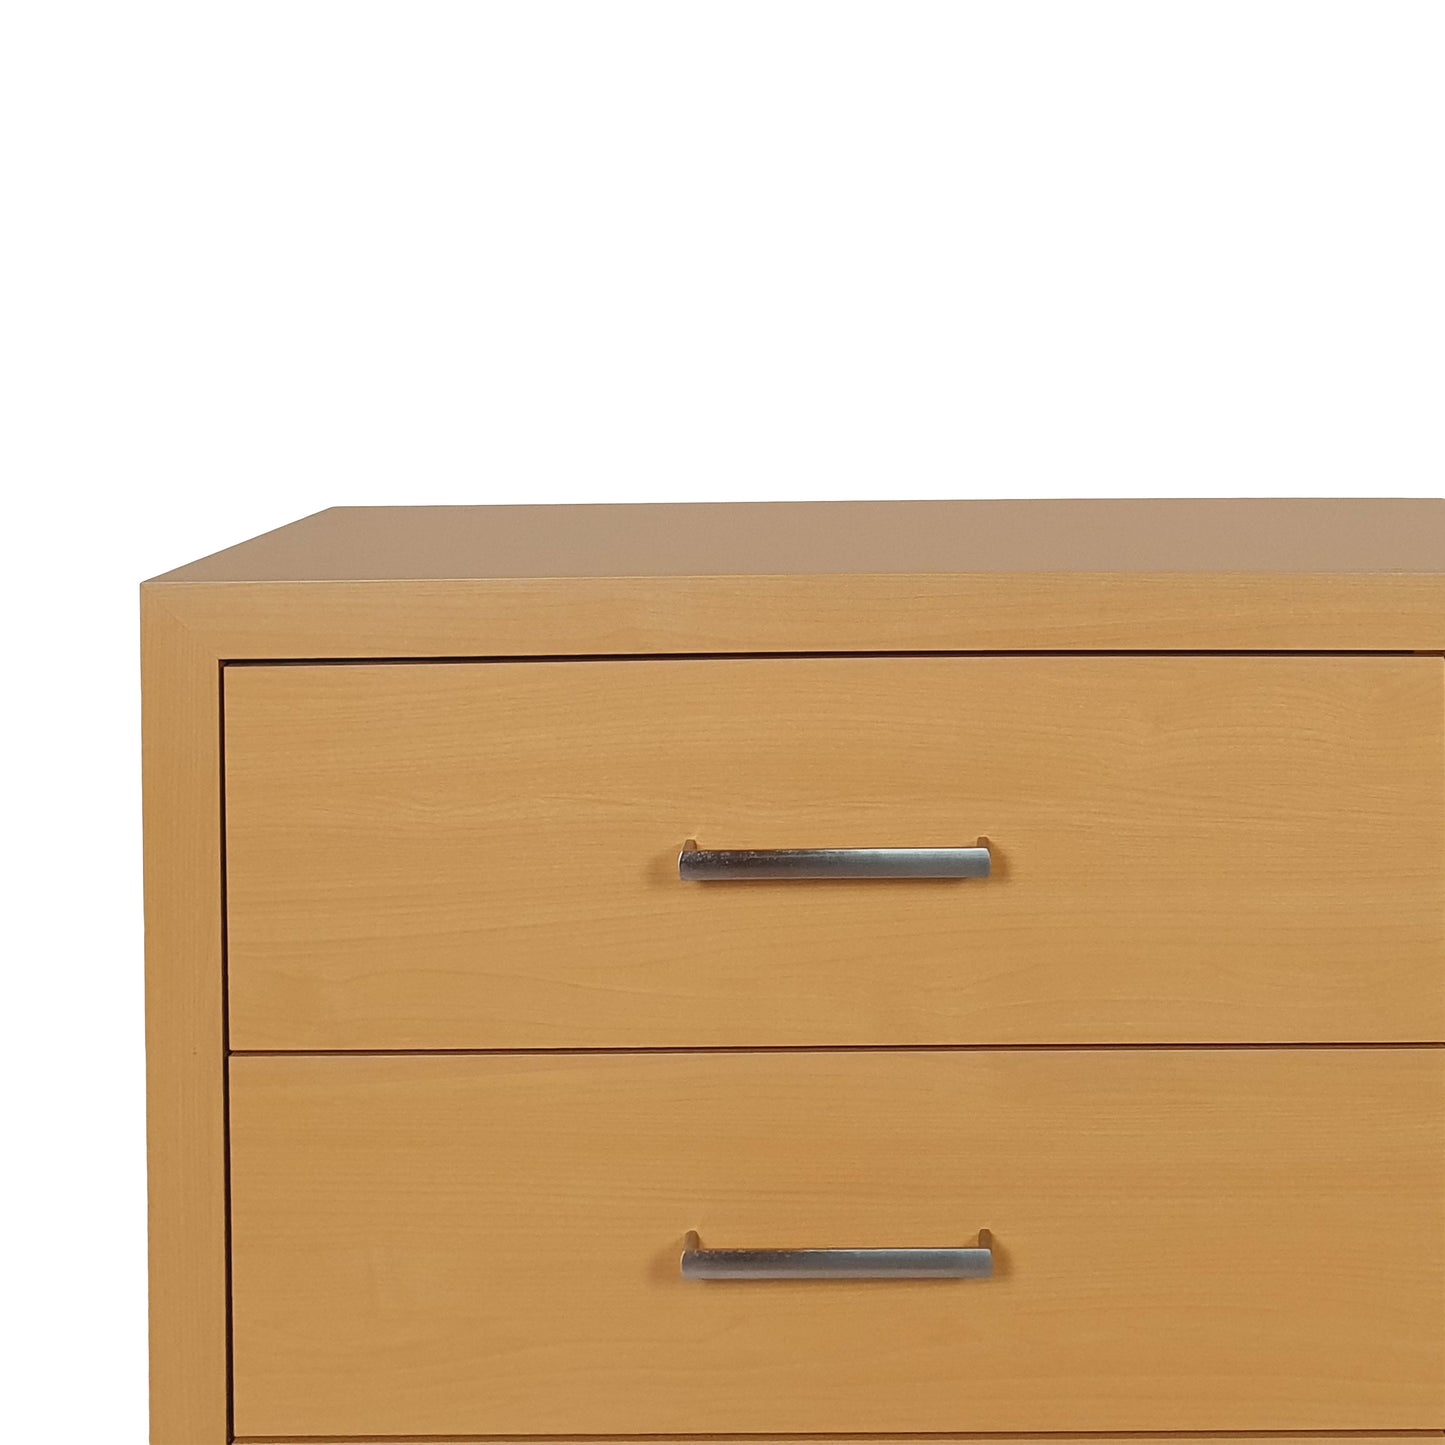 Borah Contemporary Faux Wood 2 Piece Double Dresser and Nightstand Bedroom Set